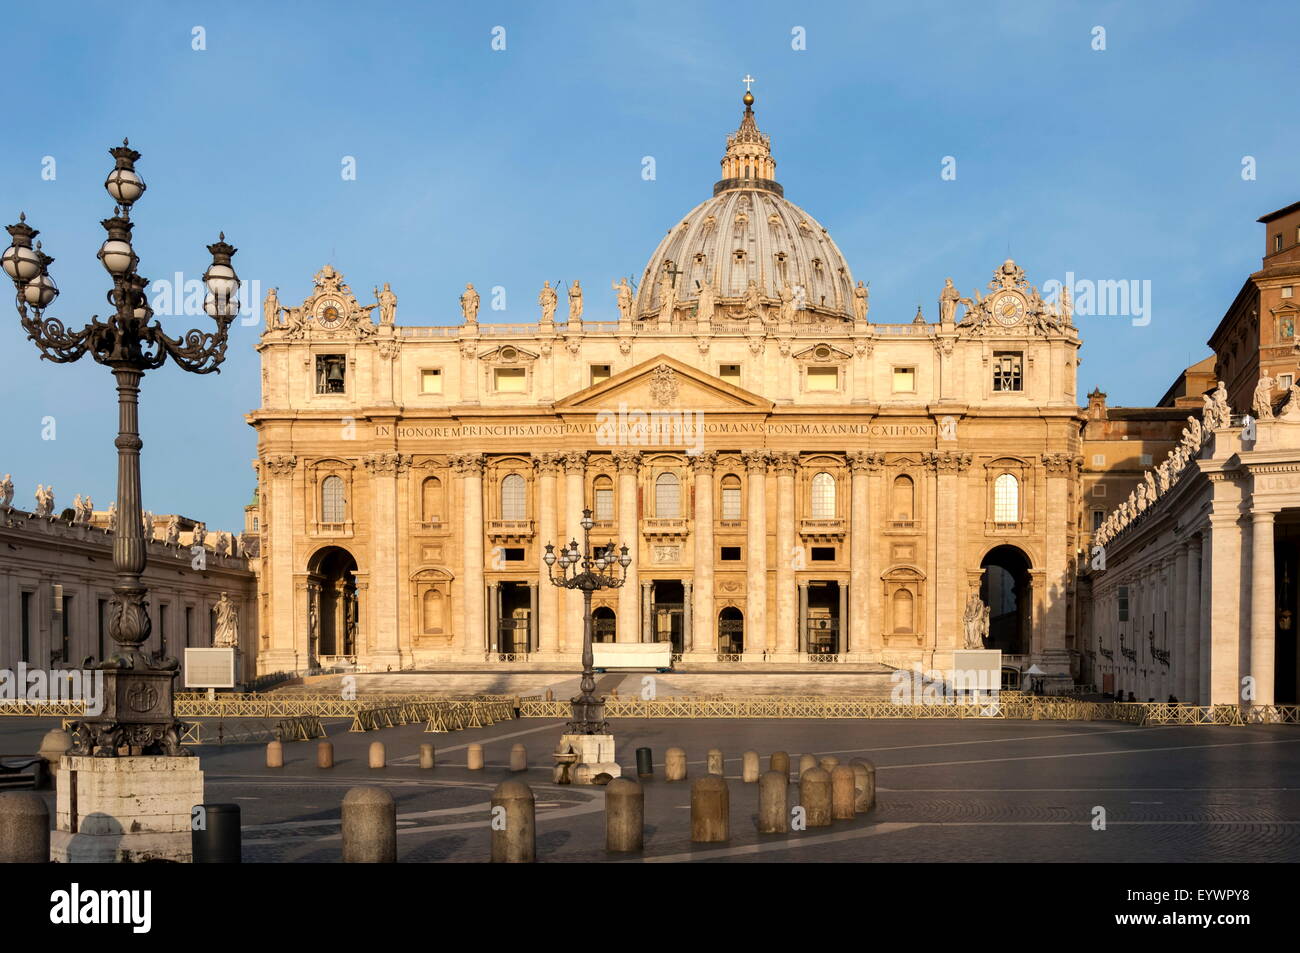 St. Peters and Piazza San Pietro in the early morning, Vatican City, UNESCO World Heritage Site, Rome, Lazio, Italy, Europe Stock Photo